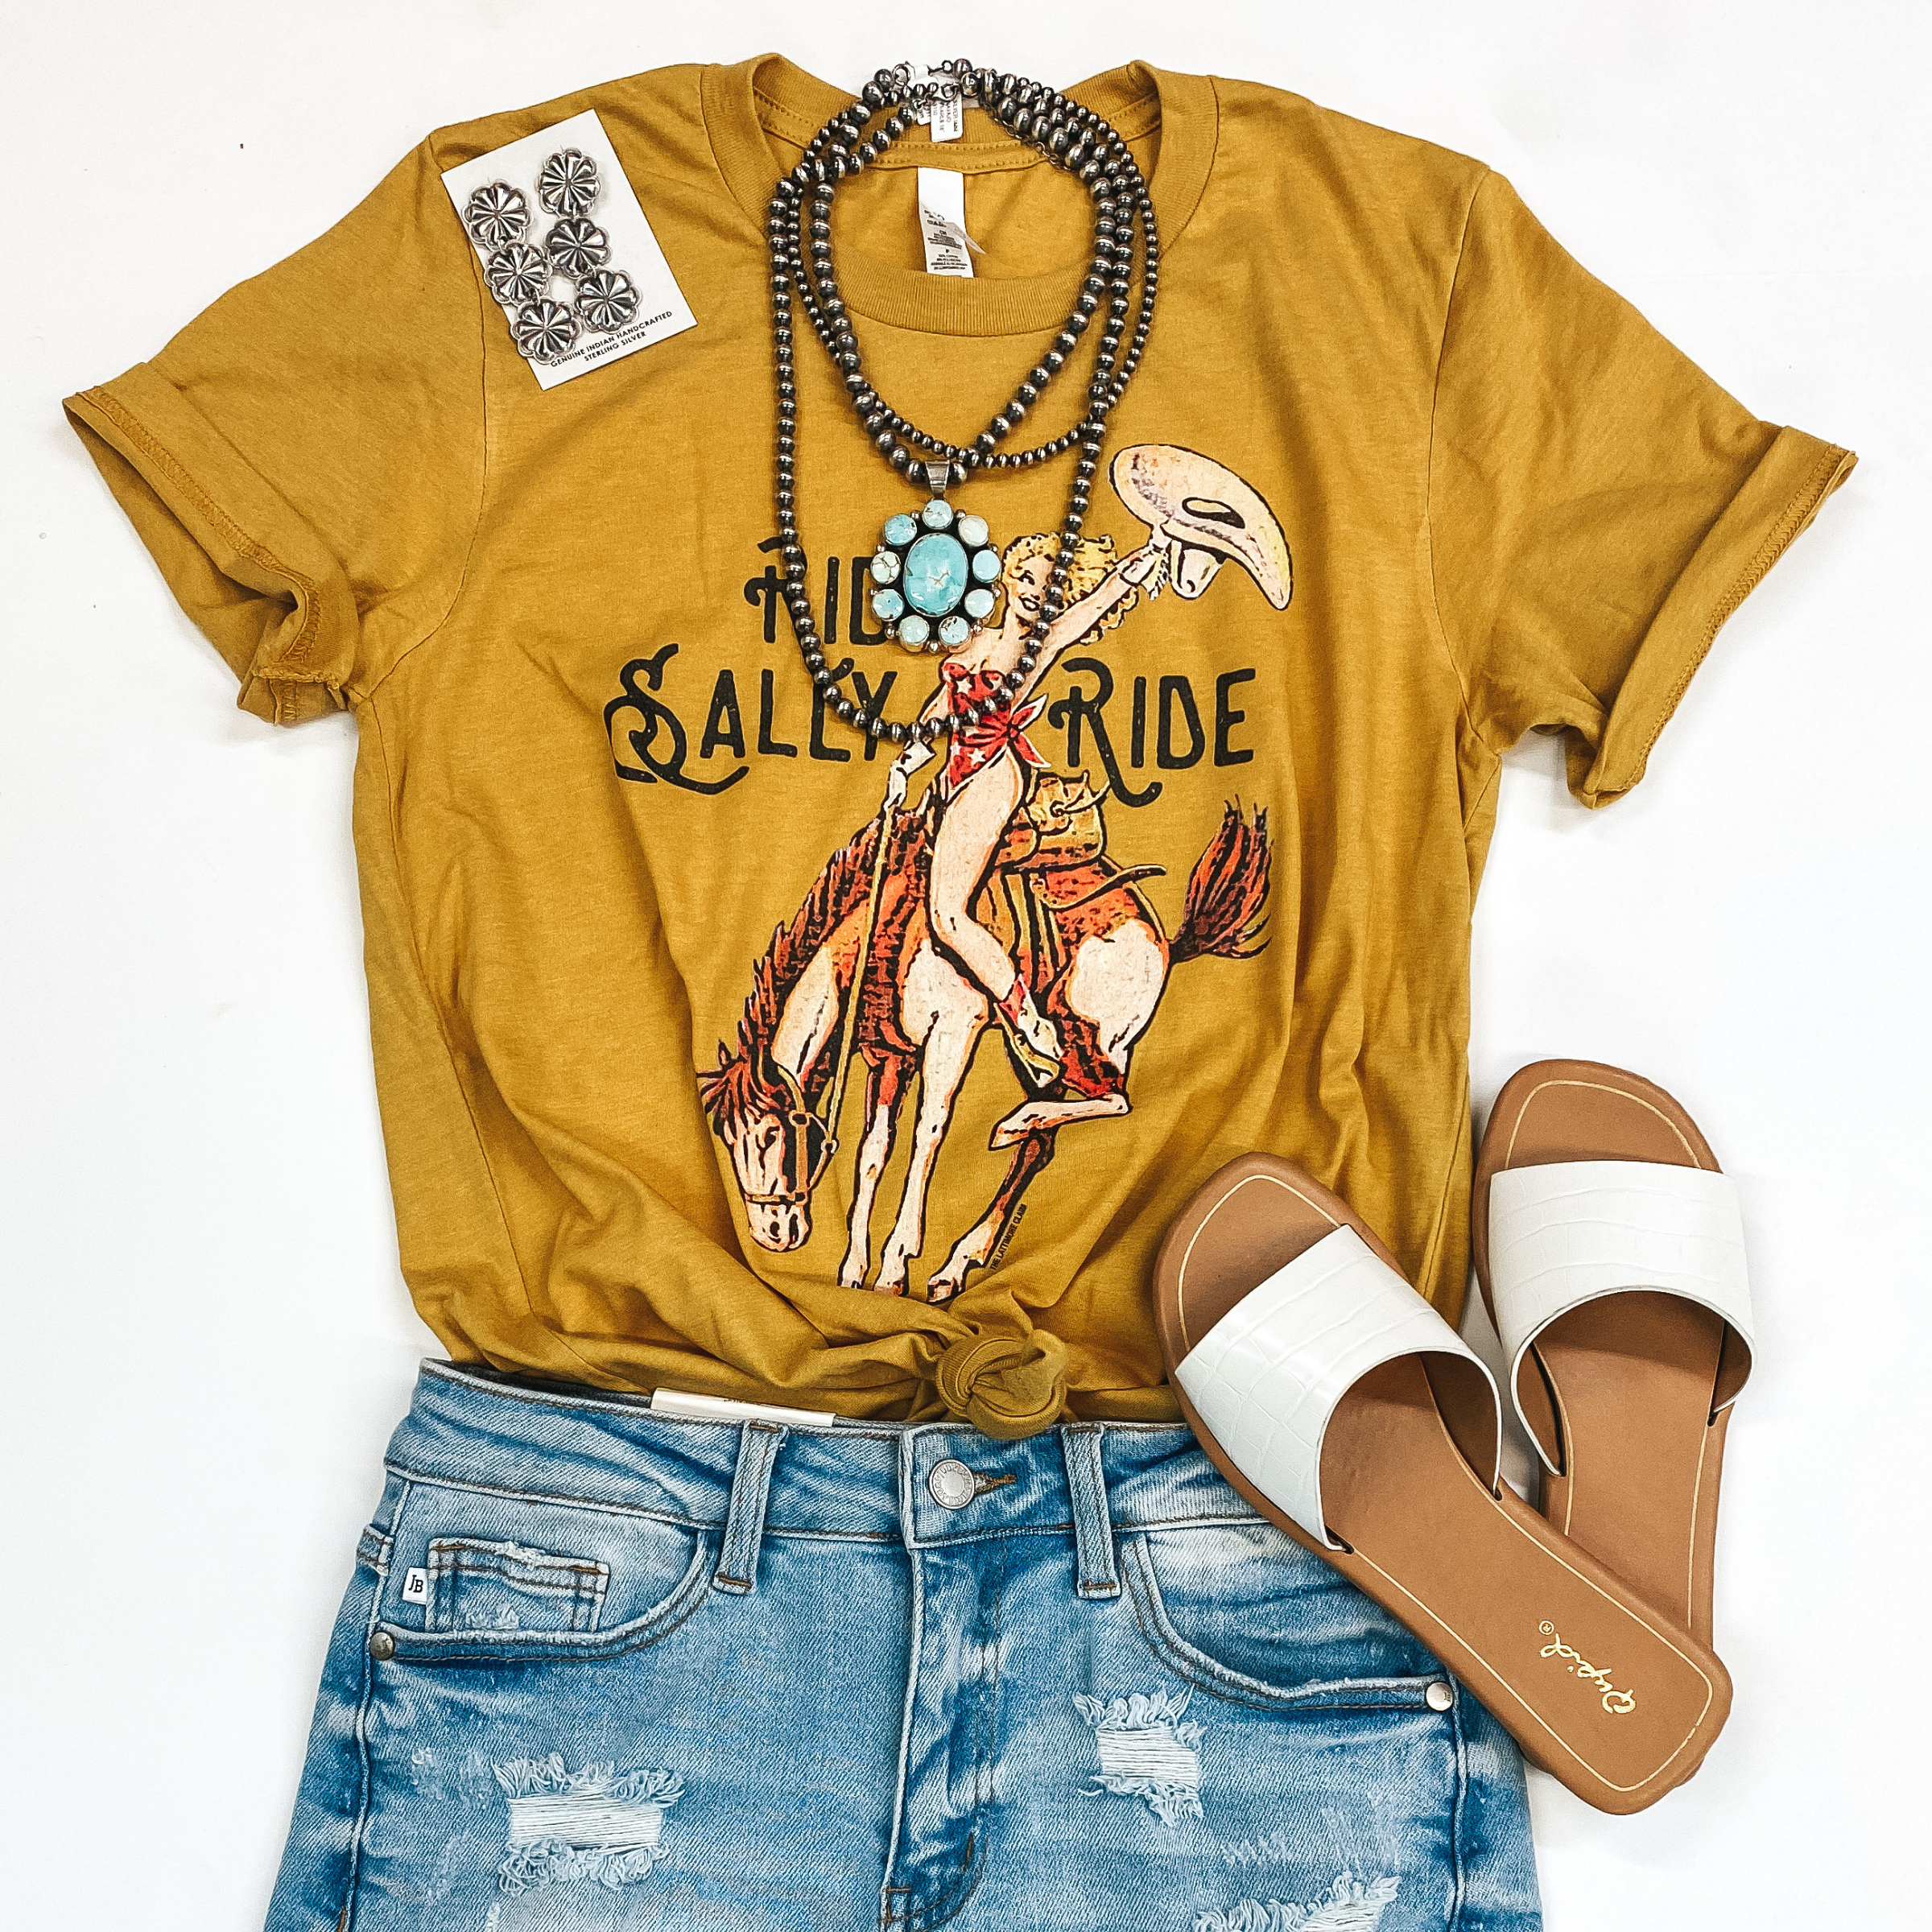 In the middle of the picture is a bucking horse with a woman on top holding a cowboy hat, in mustard yellow. This tee is paired with navajo jewelry, white sandals, and blue jean shorts. Background is solid white. 